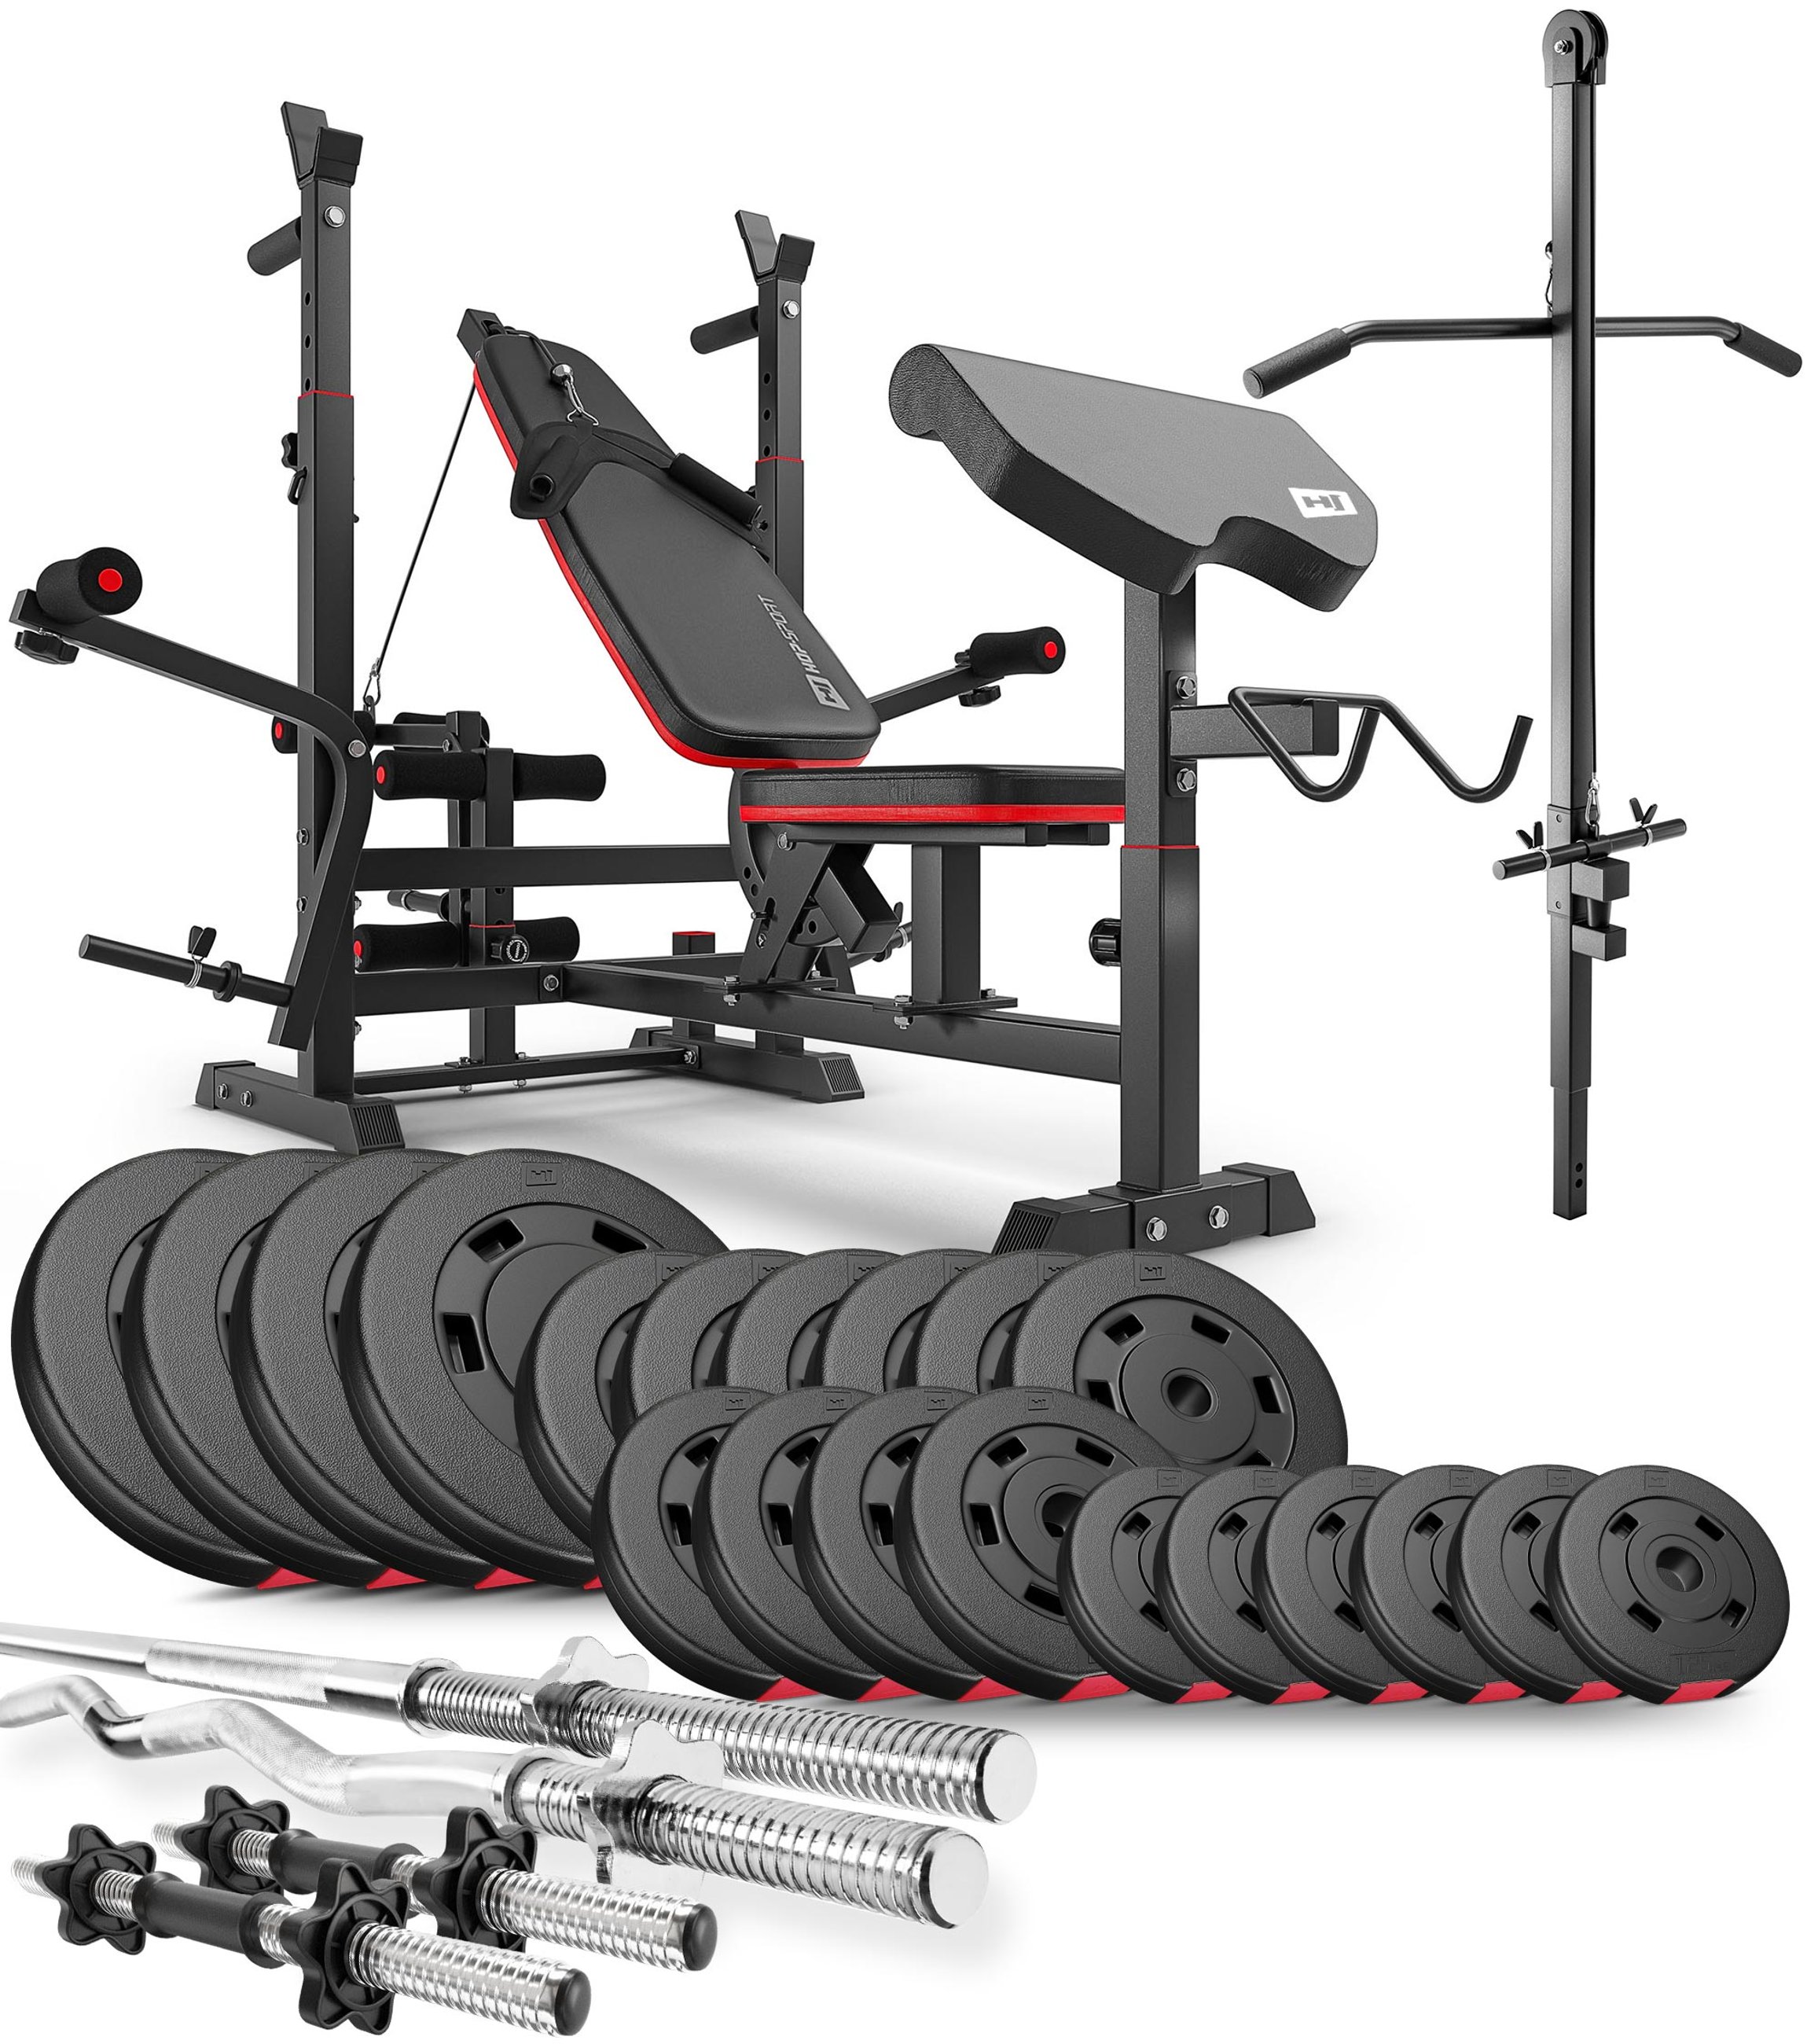 Premium 105 kg Barbell Set with HS-1075 Weight Bench